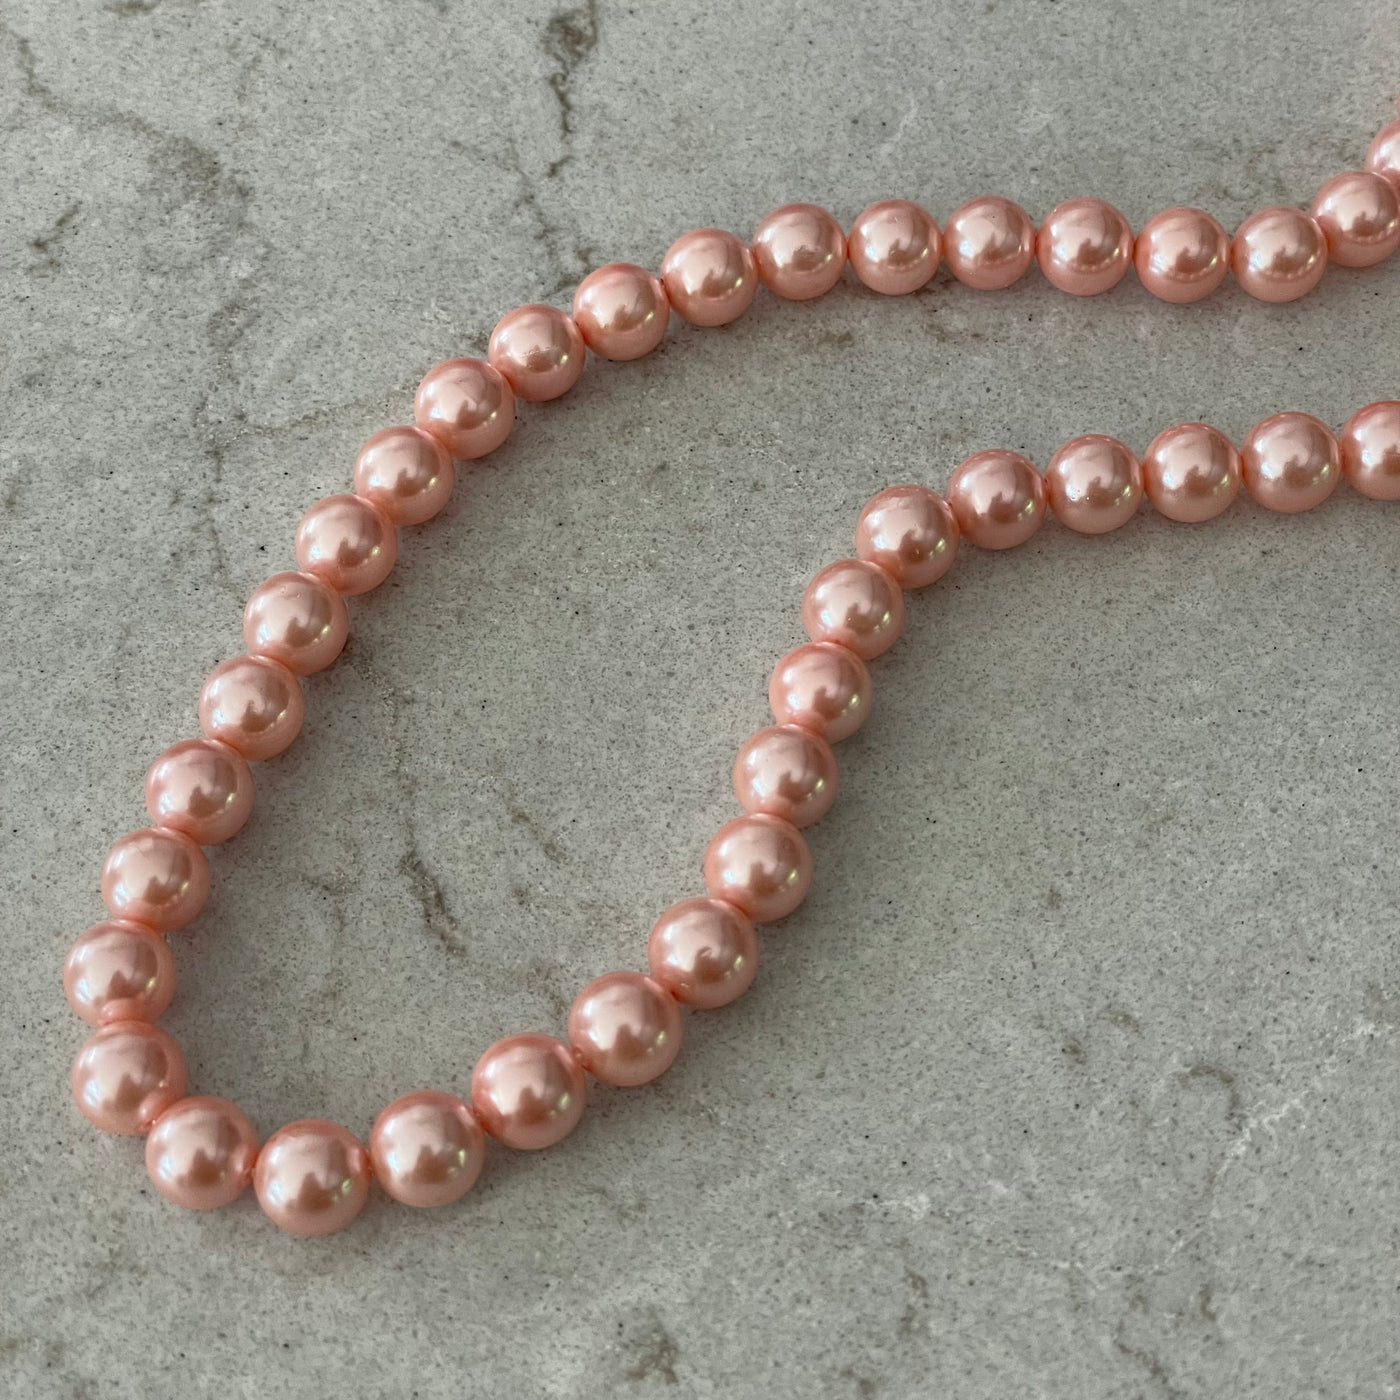 Satin Shell Bead Rope - Smooth Pale Pink